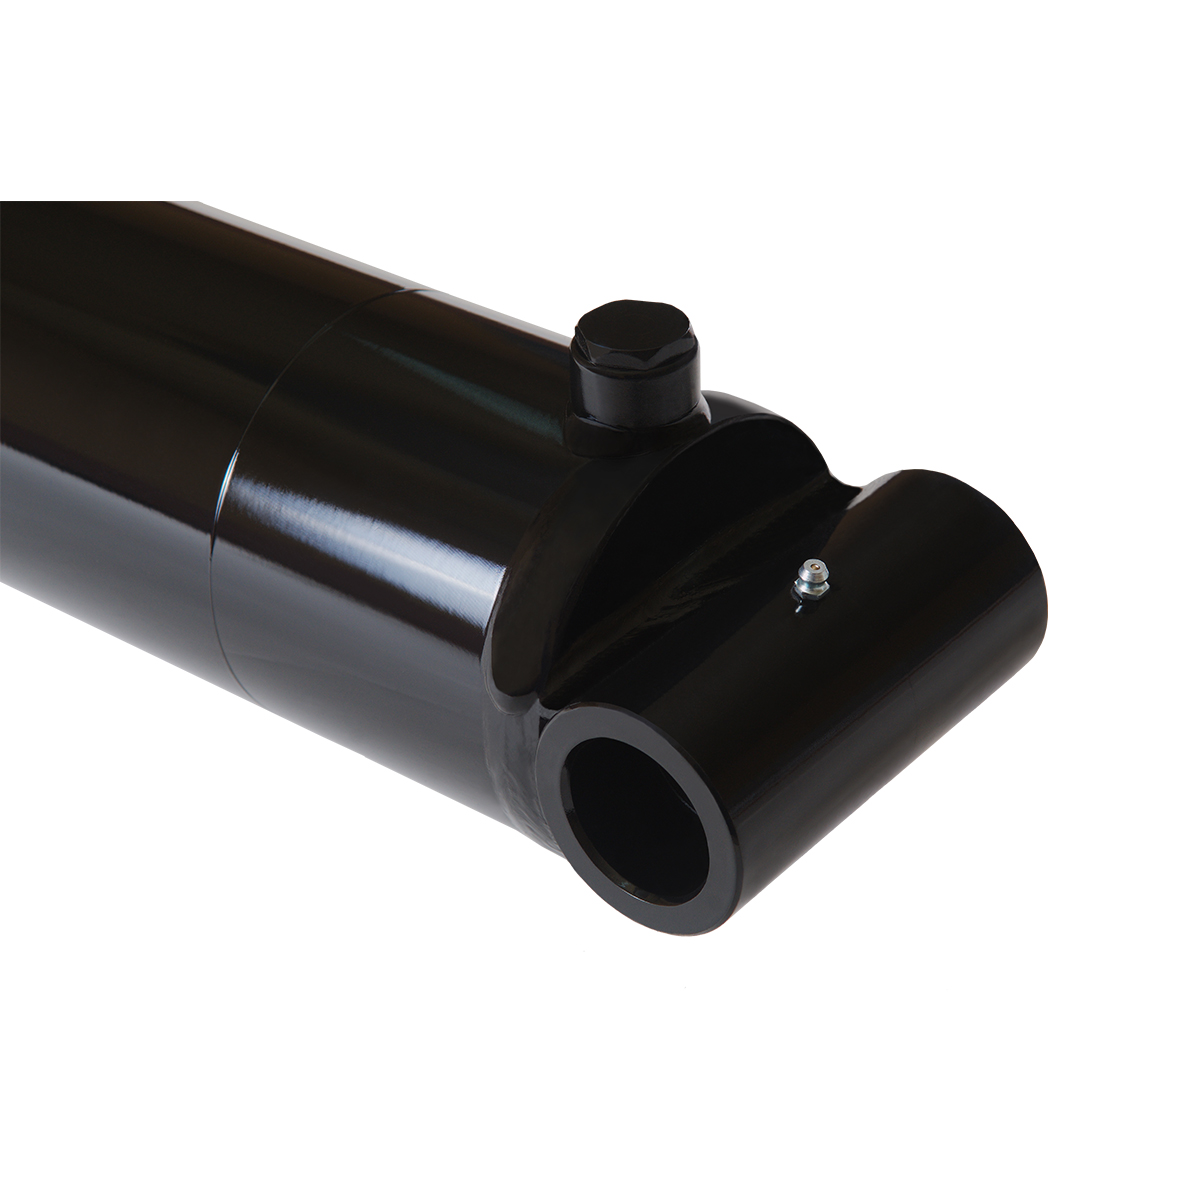 4 bore x 20 stroke hydraulic cylinder, welded cross tube double acting cylinder | Magister Hydraulics